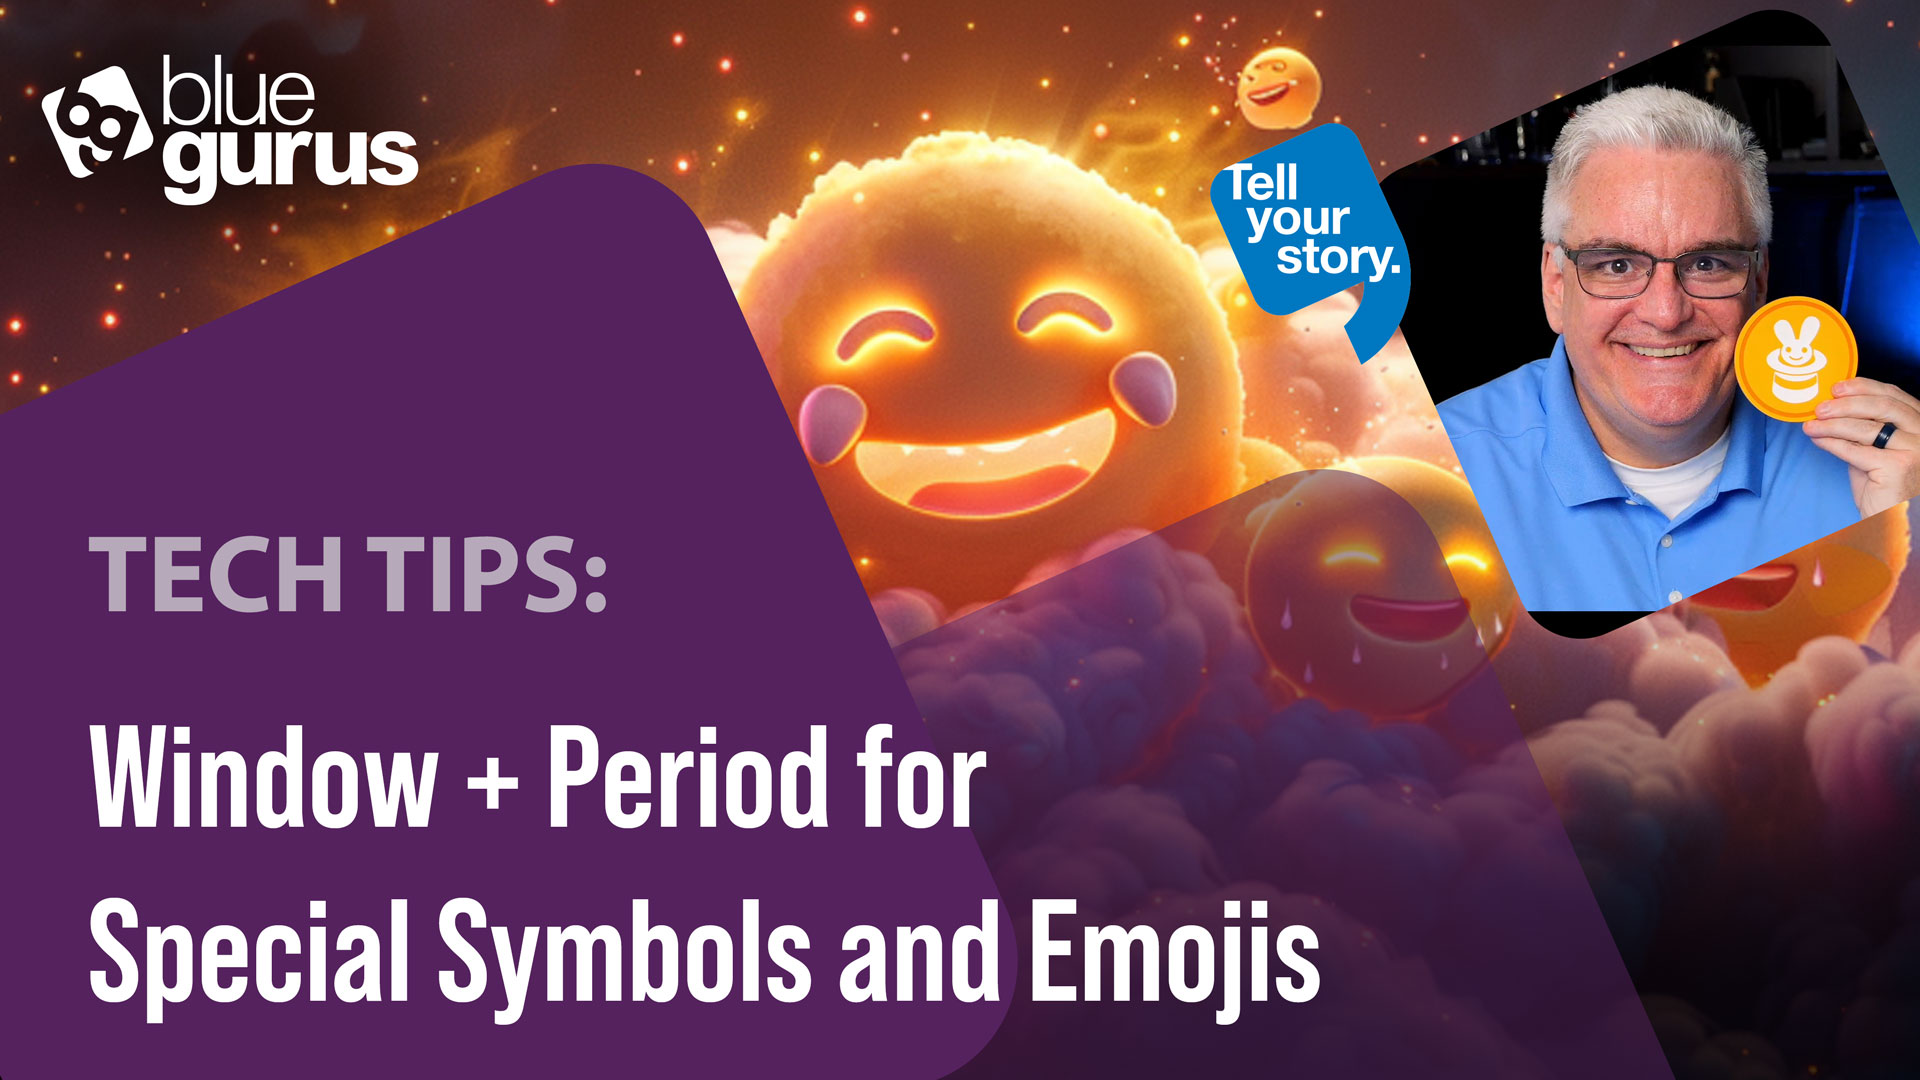 Tech Tips: Window + Period for Special Symbols and Emojis